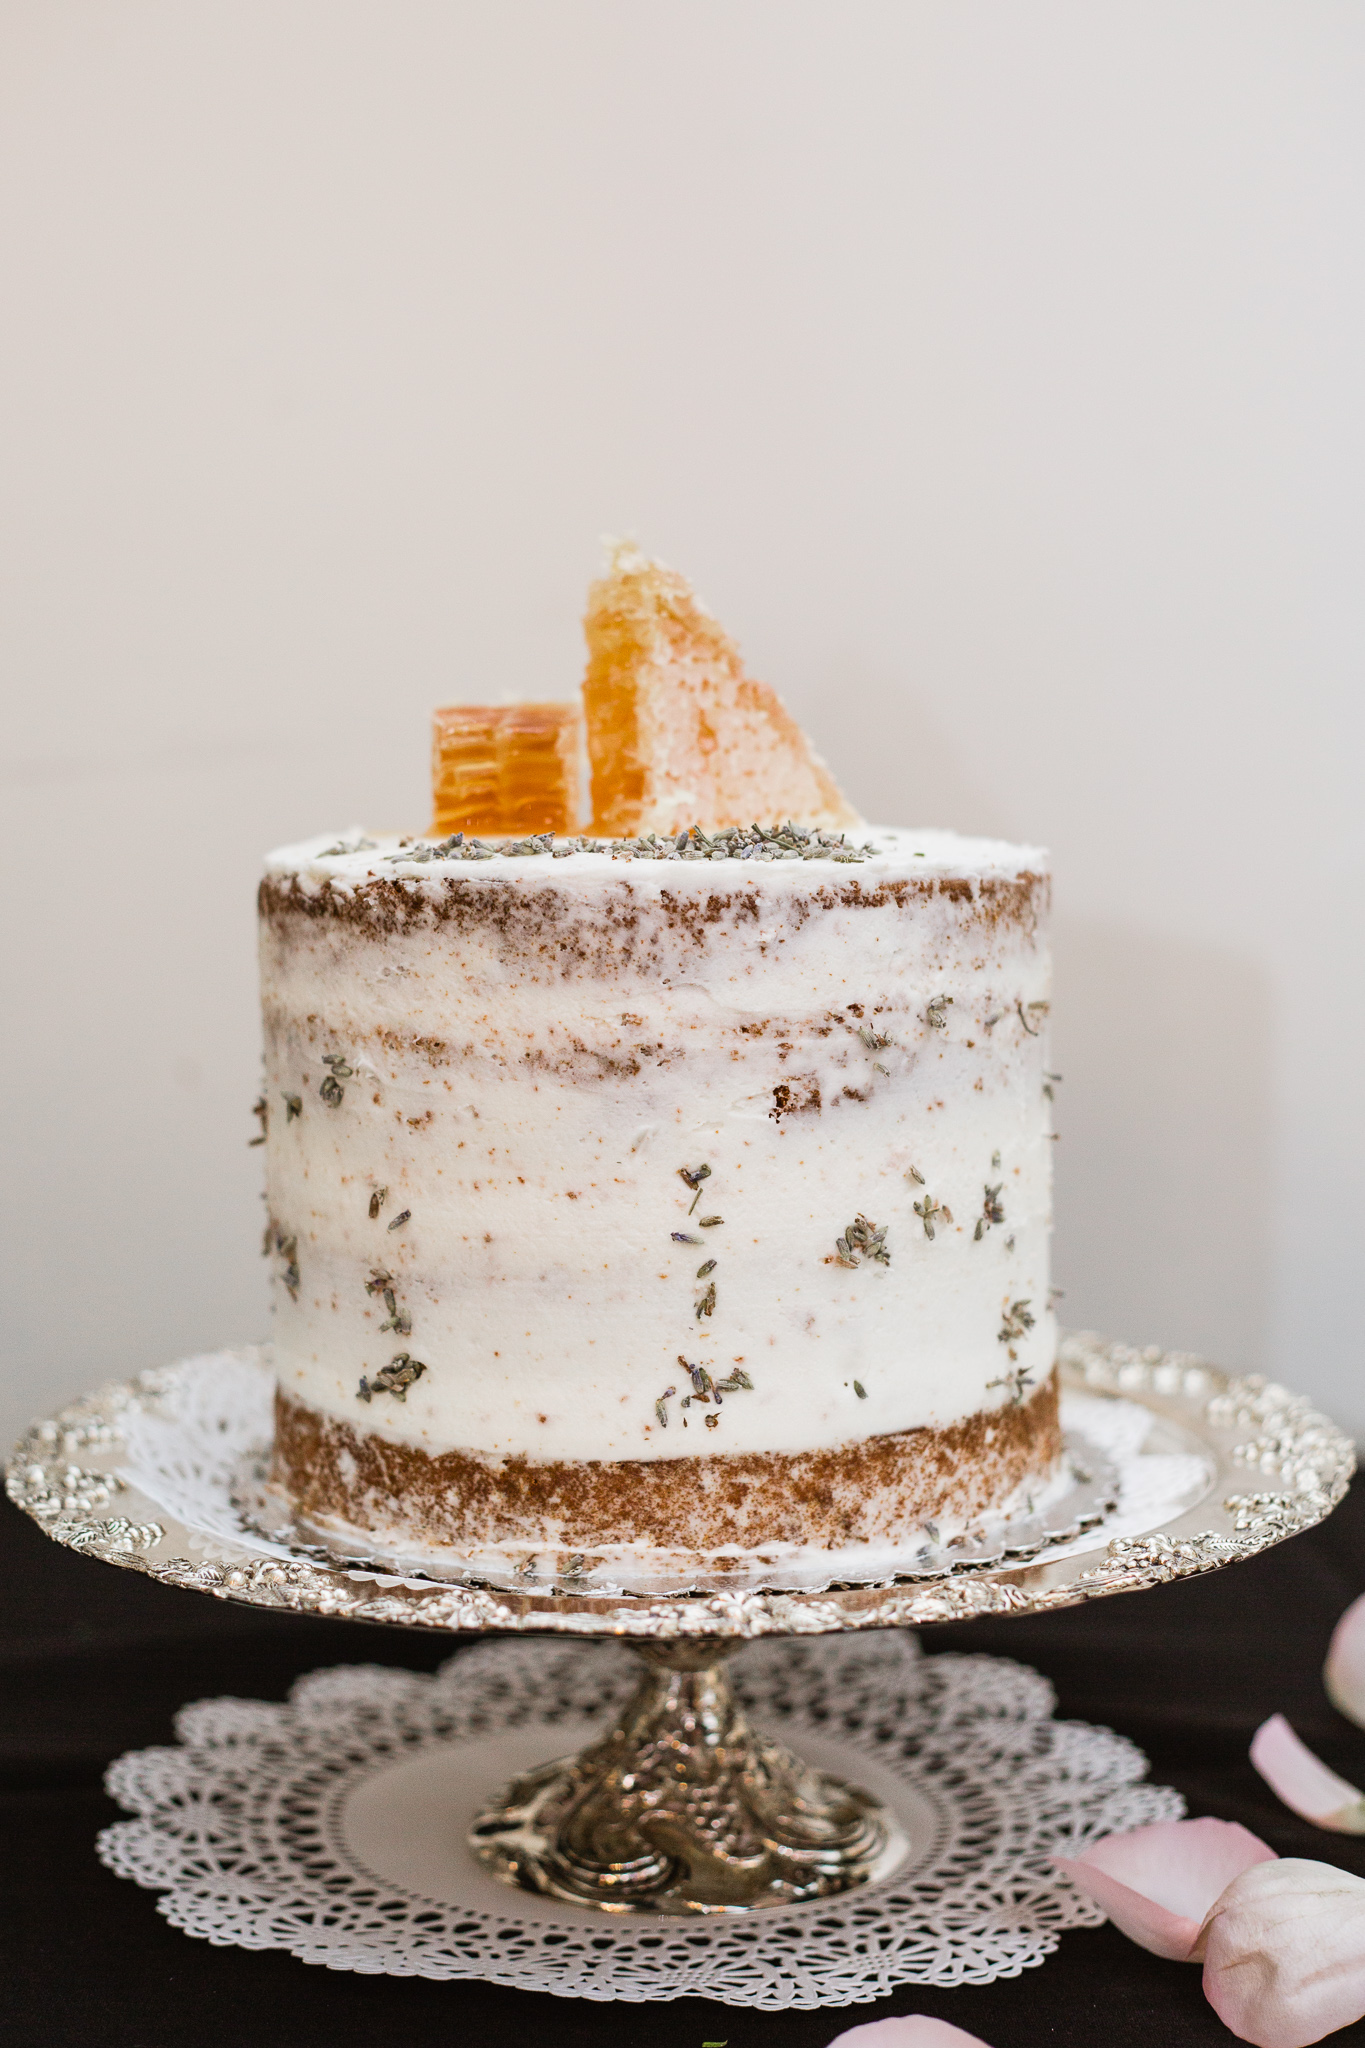 Vintage inspired honeycomb and lavender wedding cake by Bear and the Honey Phoenix by wedding photographers PMA Photography.